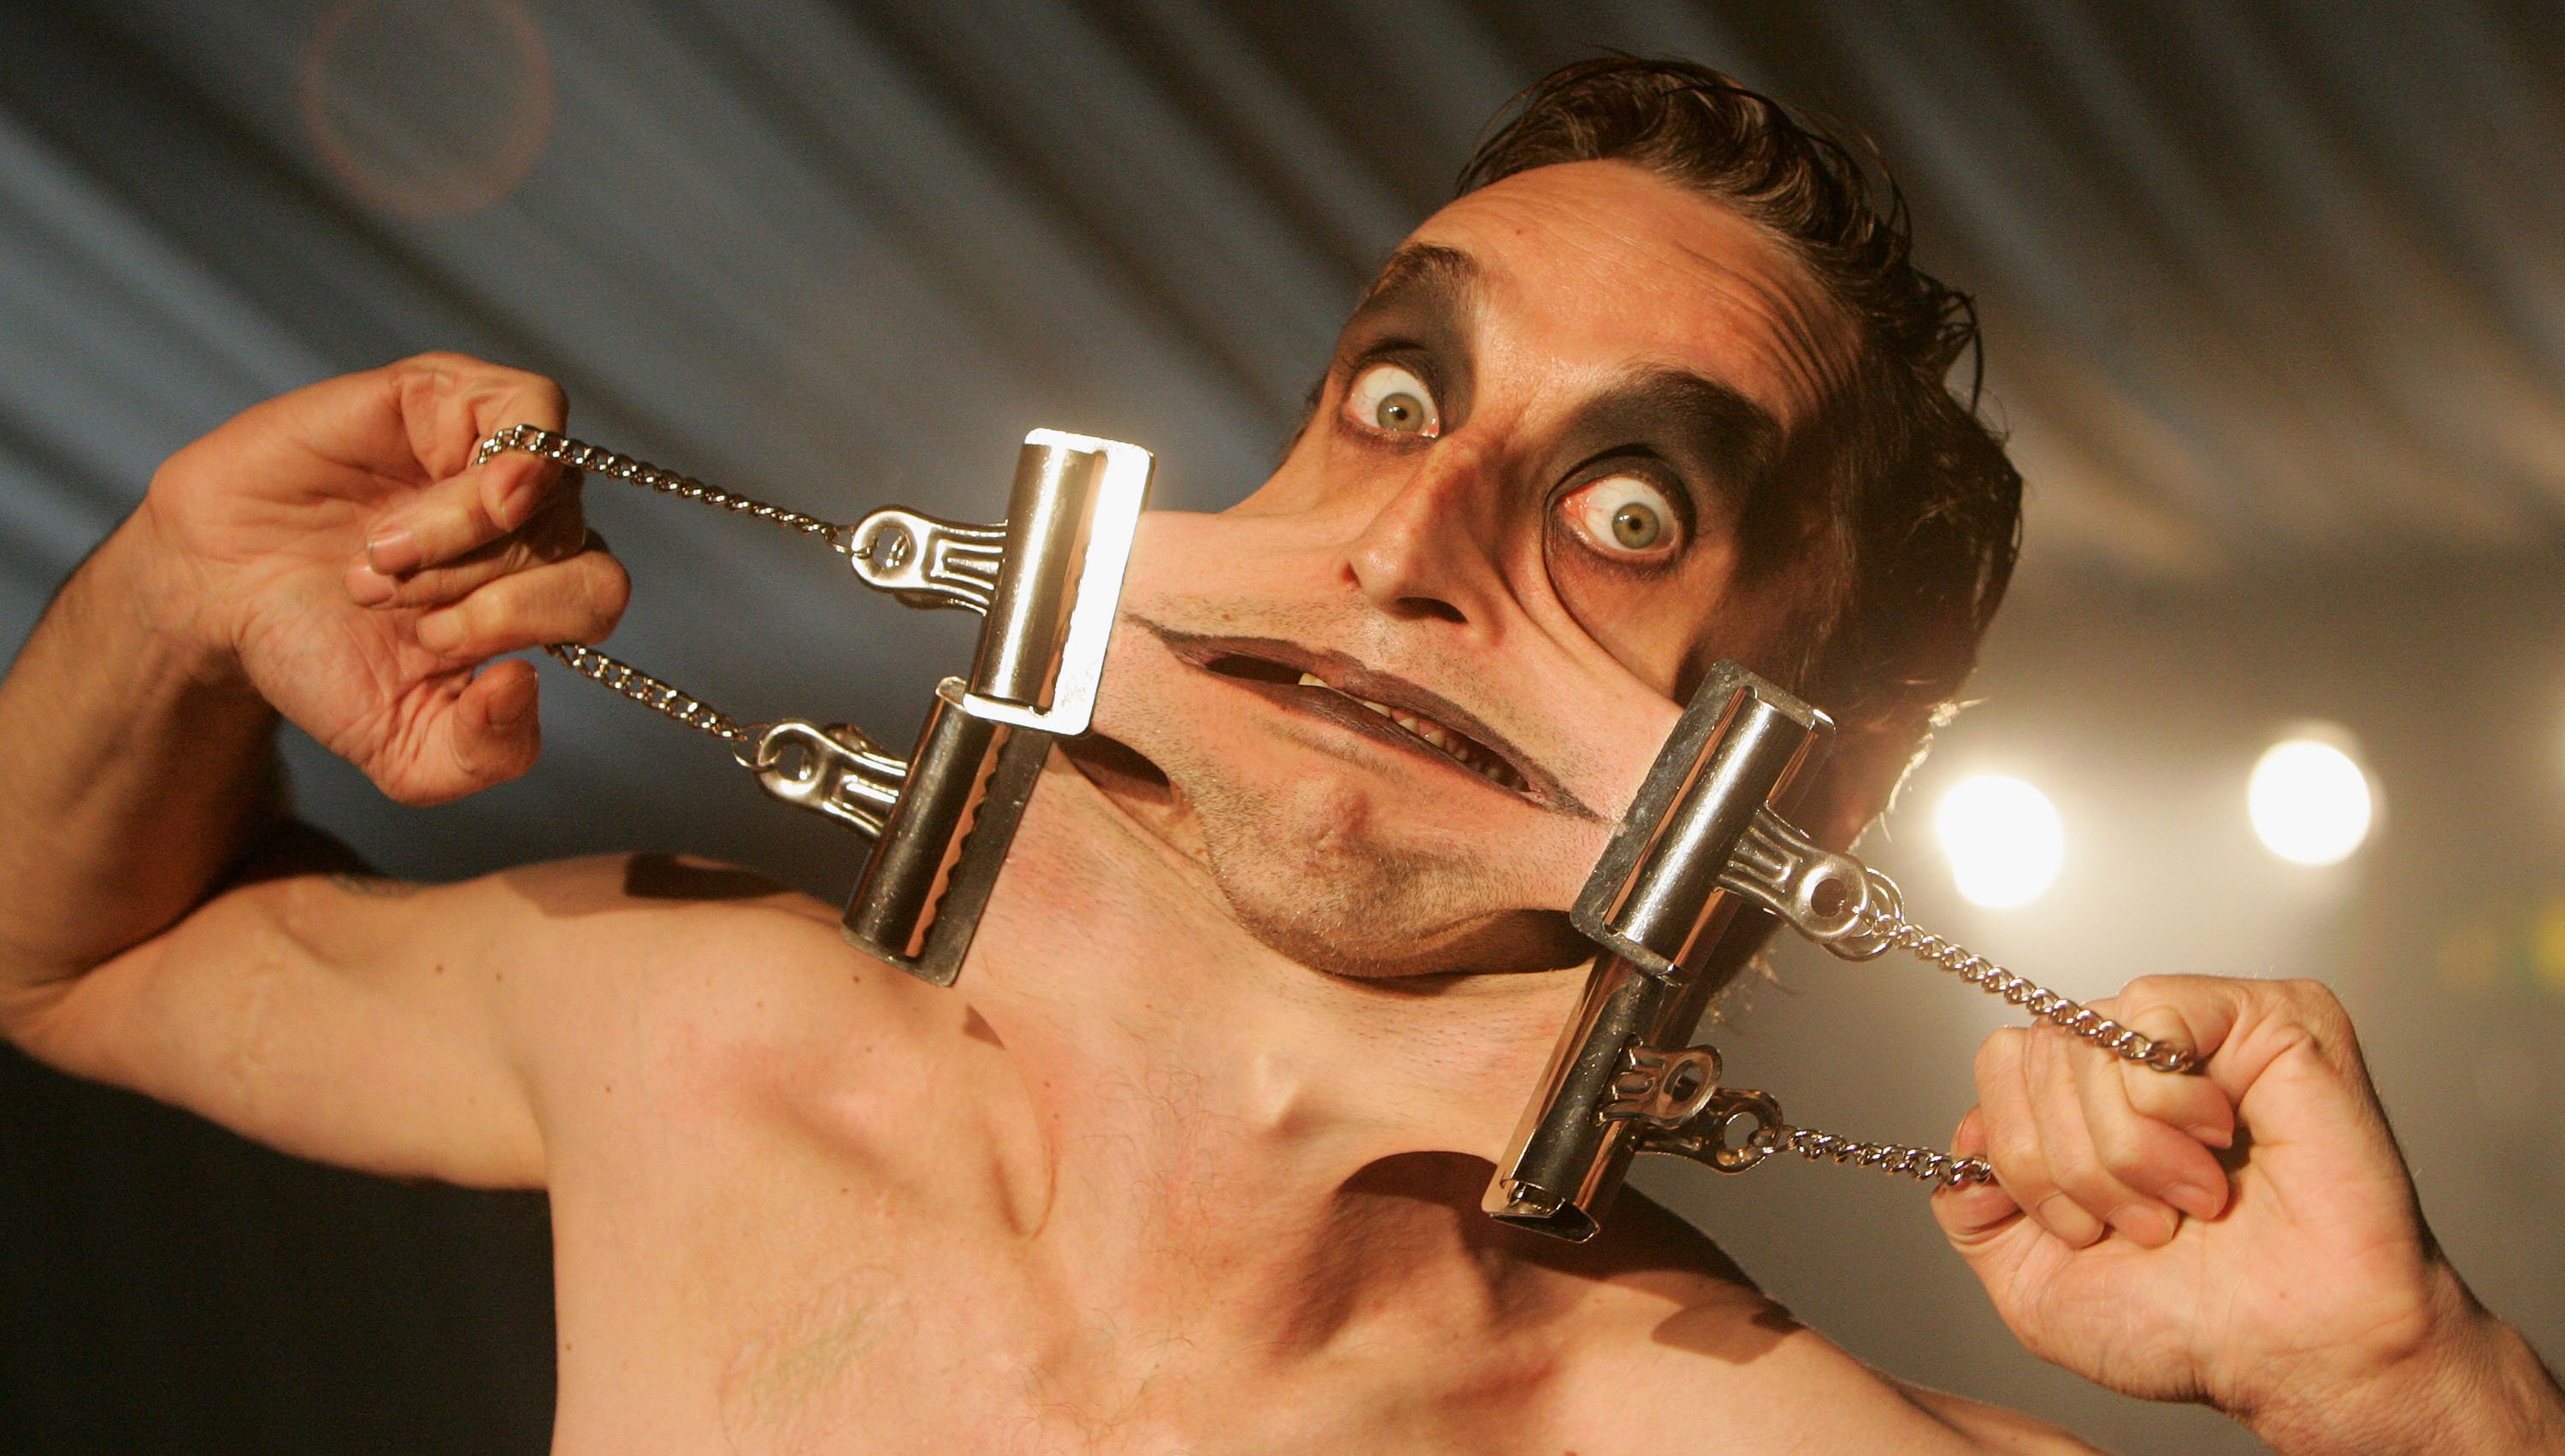 Garry Stretch, who holds the Guinness World Record for having the stretchiest skin, performs before the judges during the auditions for the Circus of Horrors at Fairfield Halls on October 7, 2005 in London, England. | Source: Getty Images 